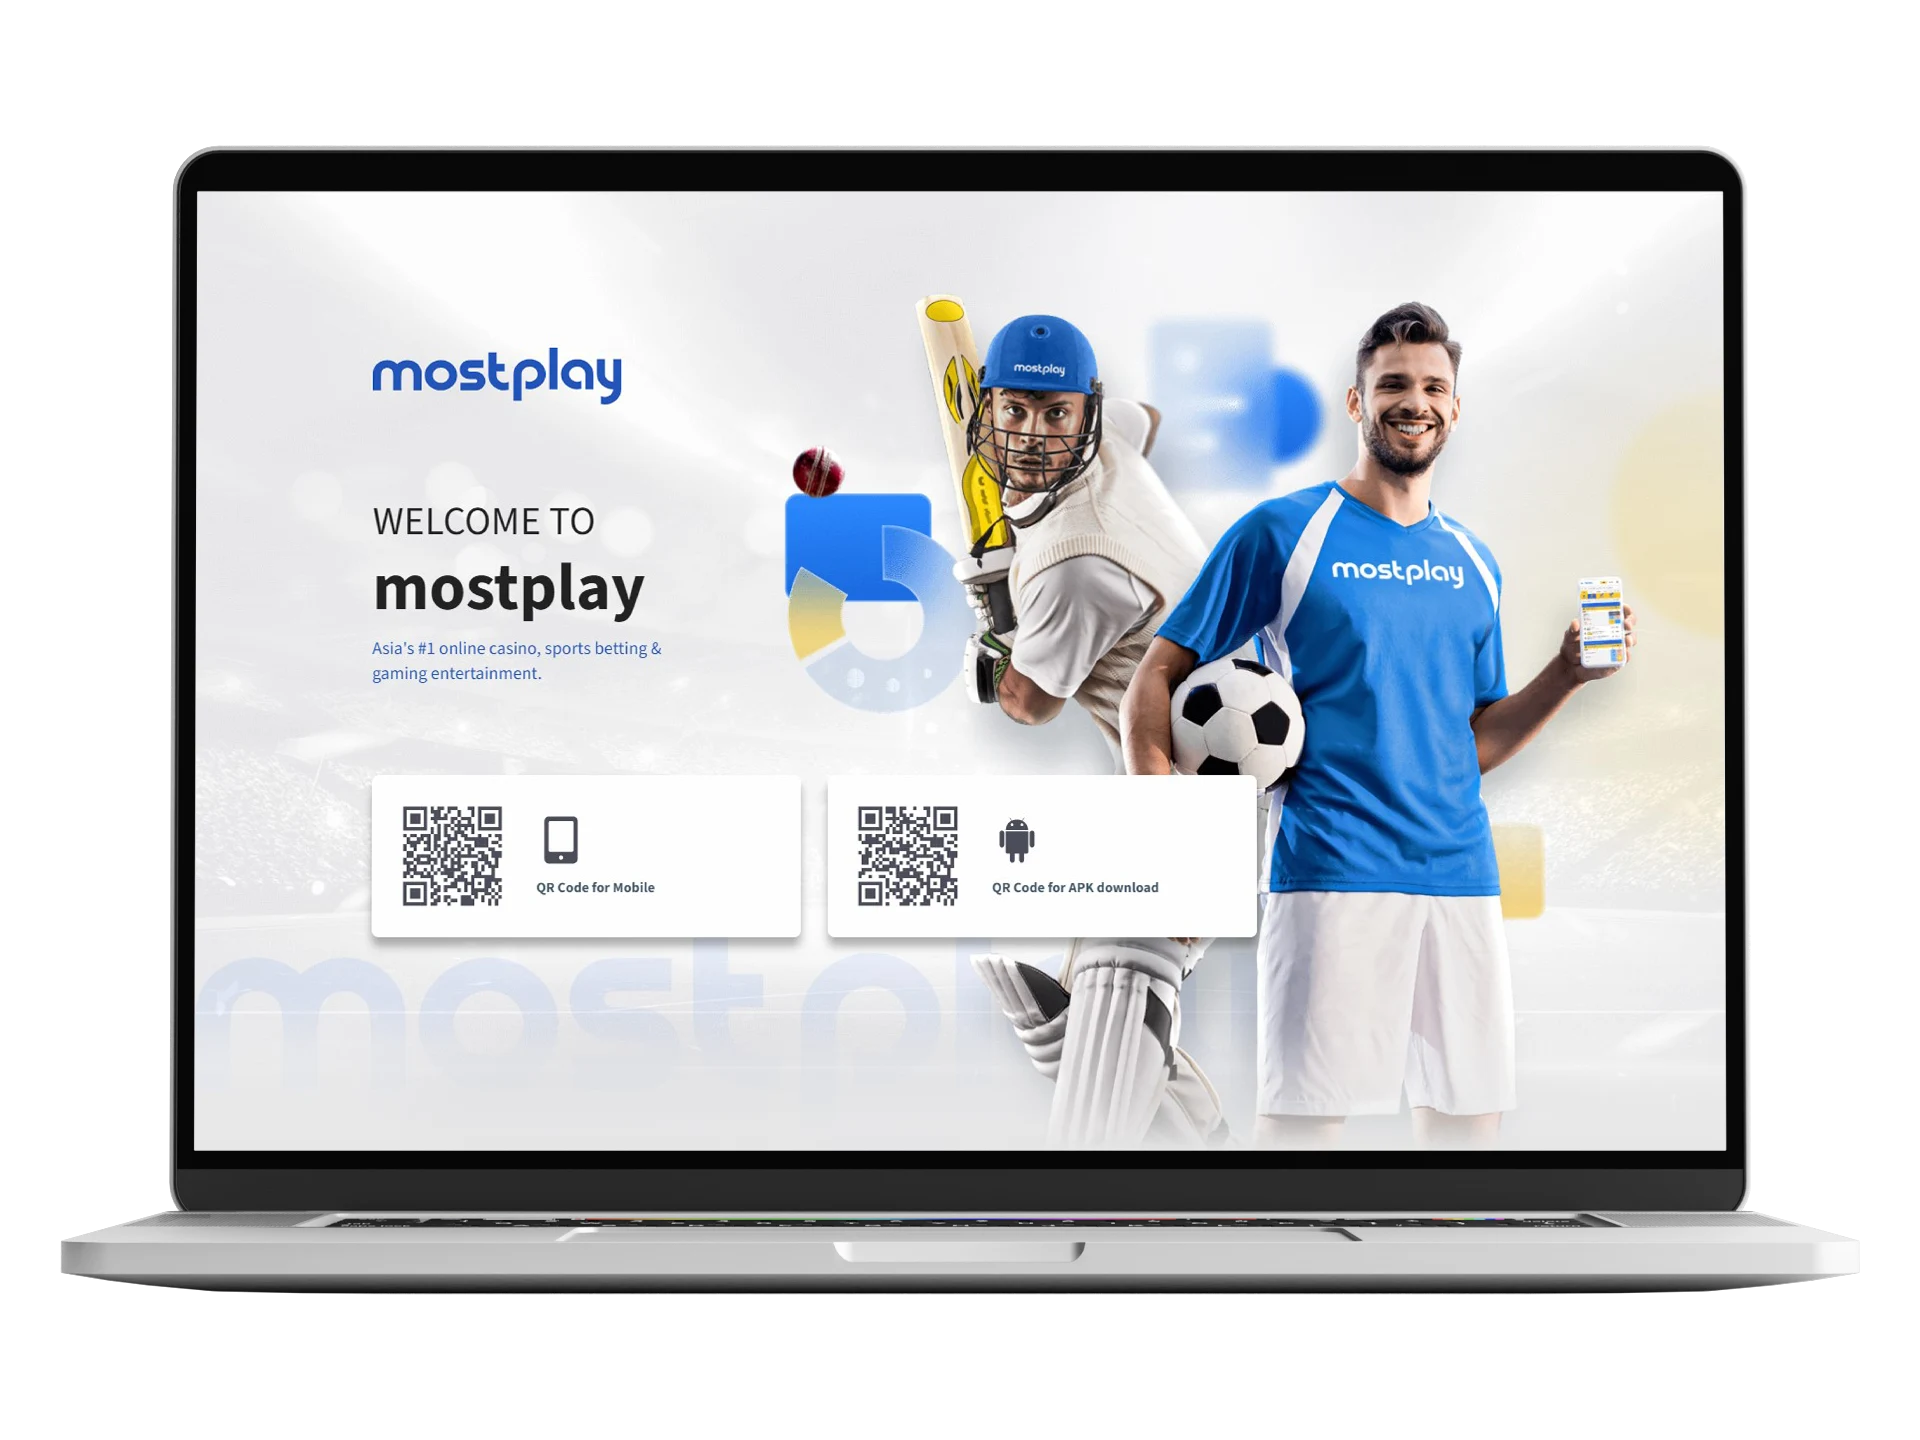 MostPlay has perfectly adapted to the interests of the modern player, offering convenient account management, a sportsbook with over 25 disciplines, and a casino with over 3,000 games.